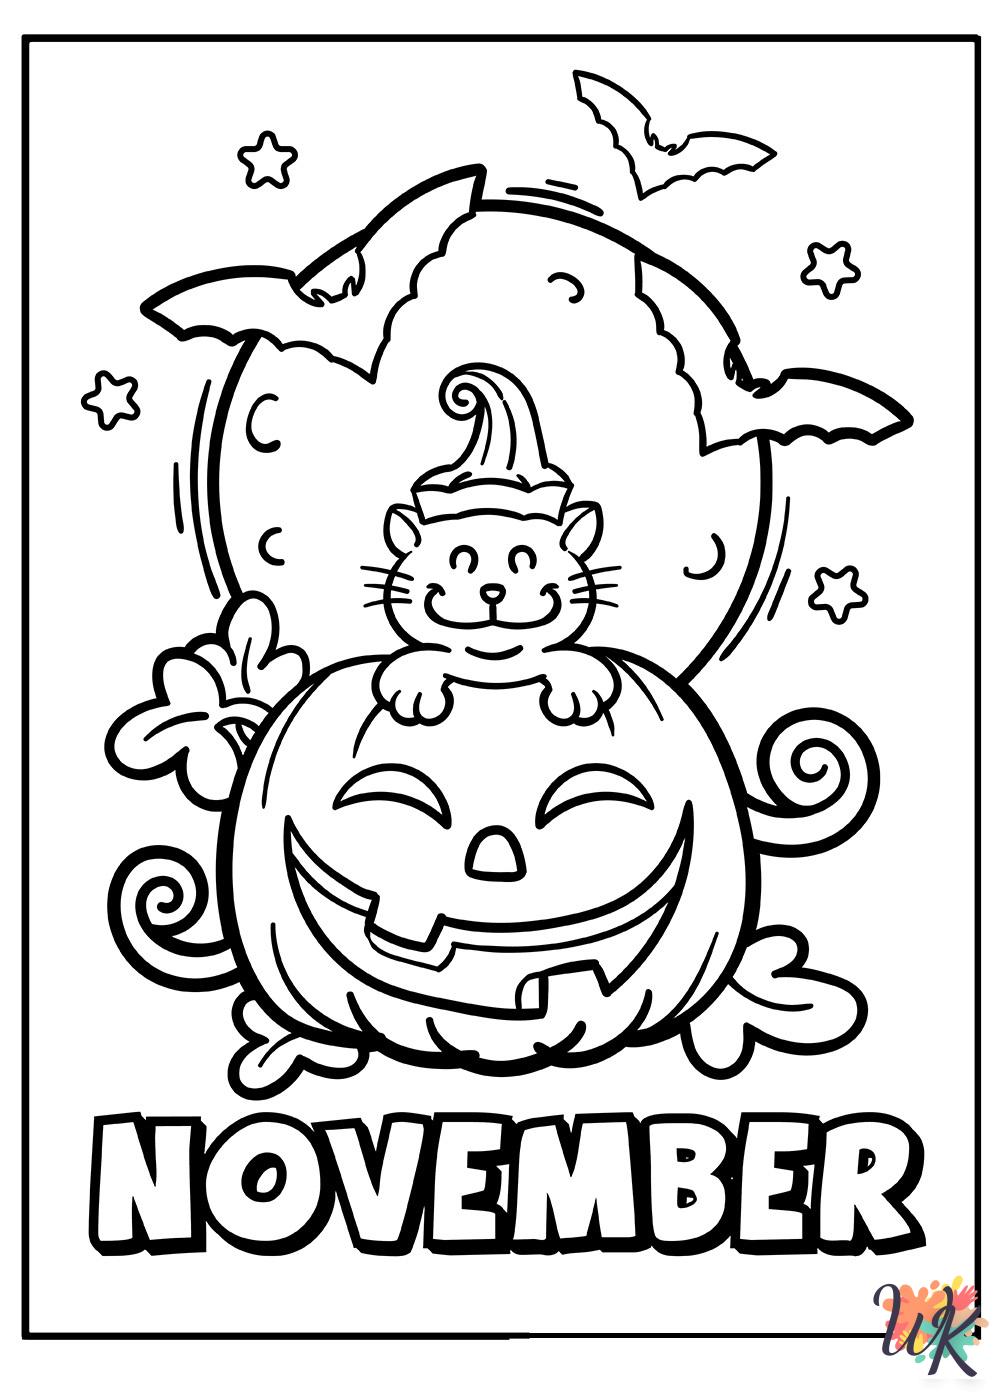 November coloring pages printable